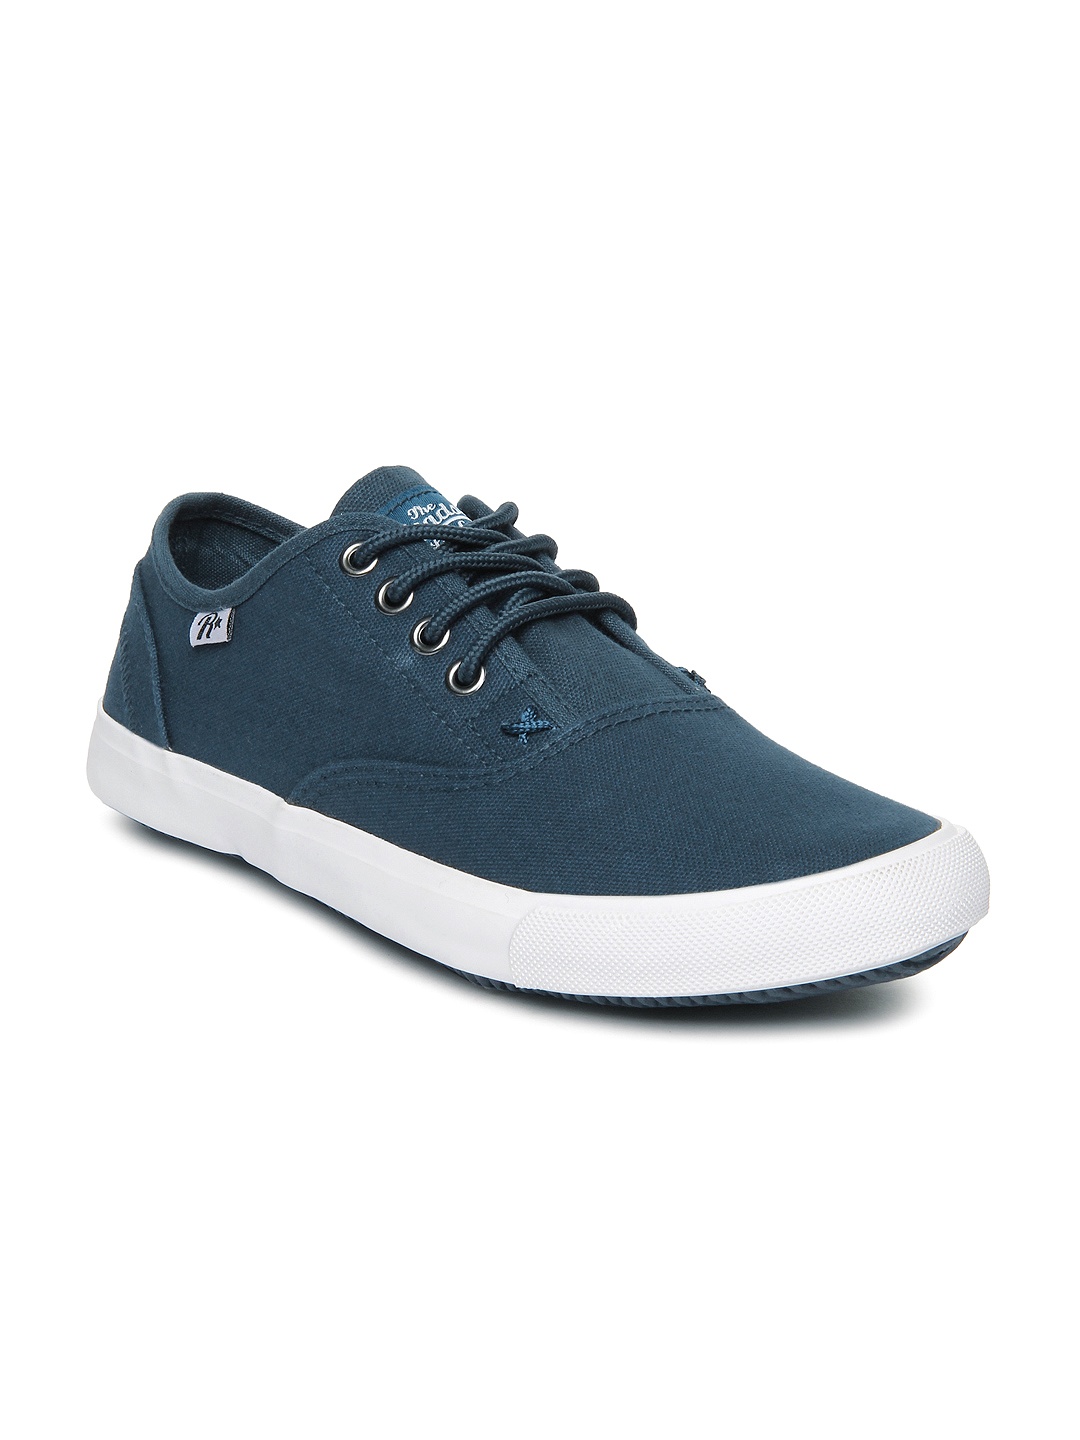 Roadster Men Navy Canvas Shoes at Myntra